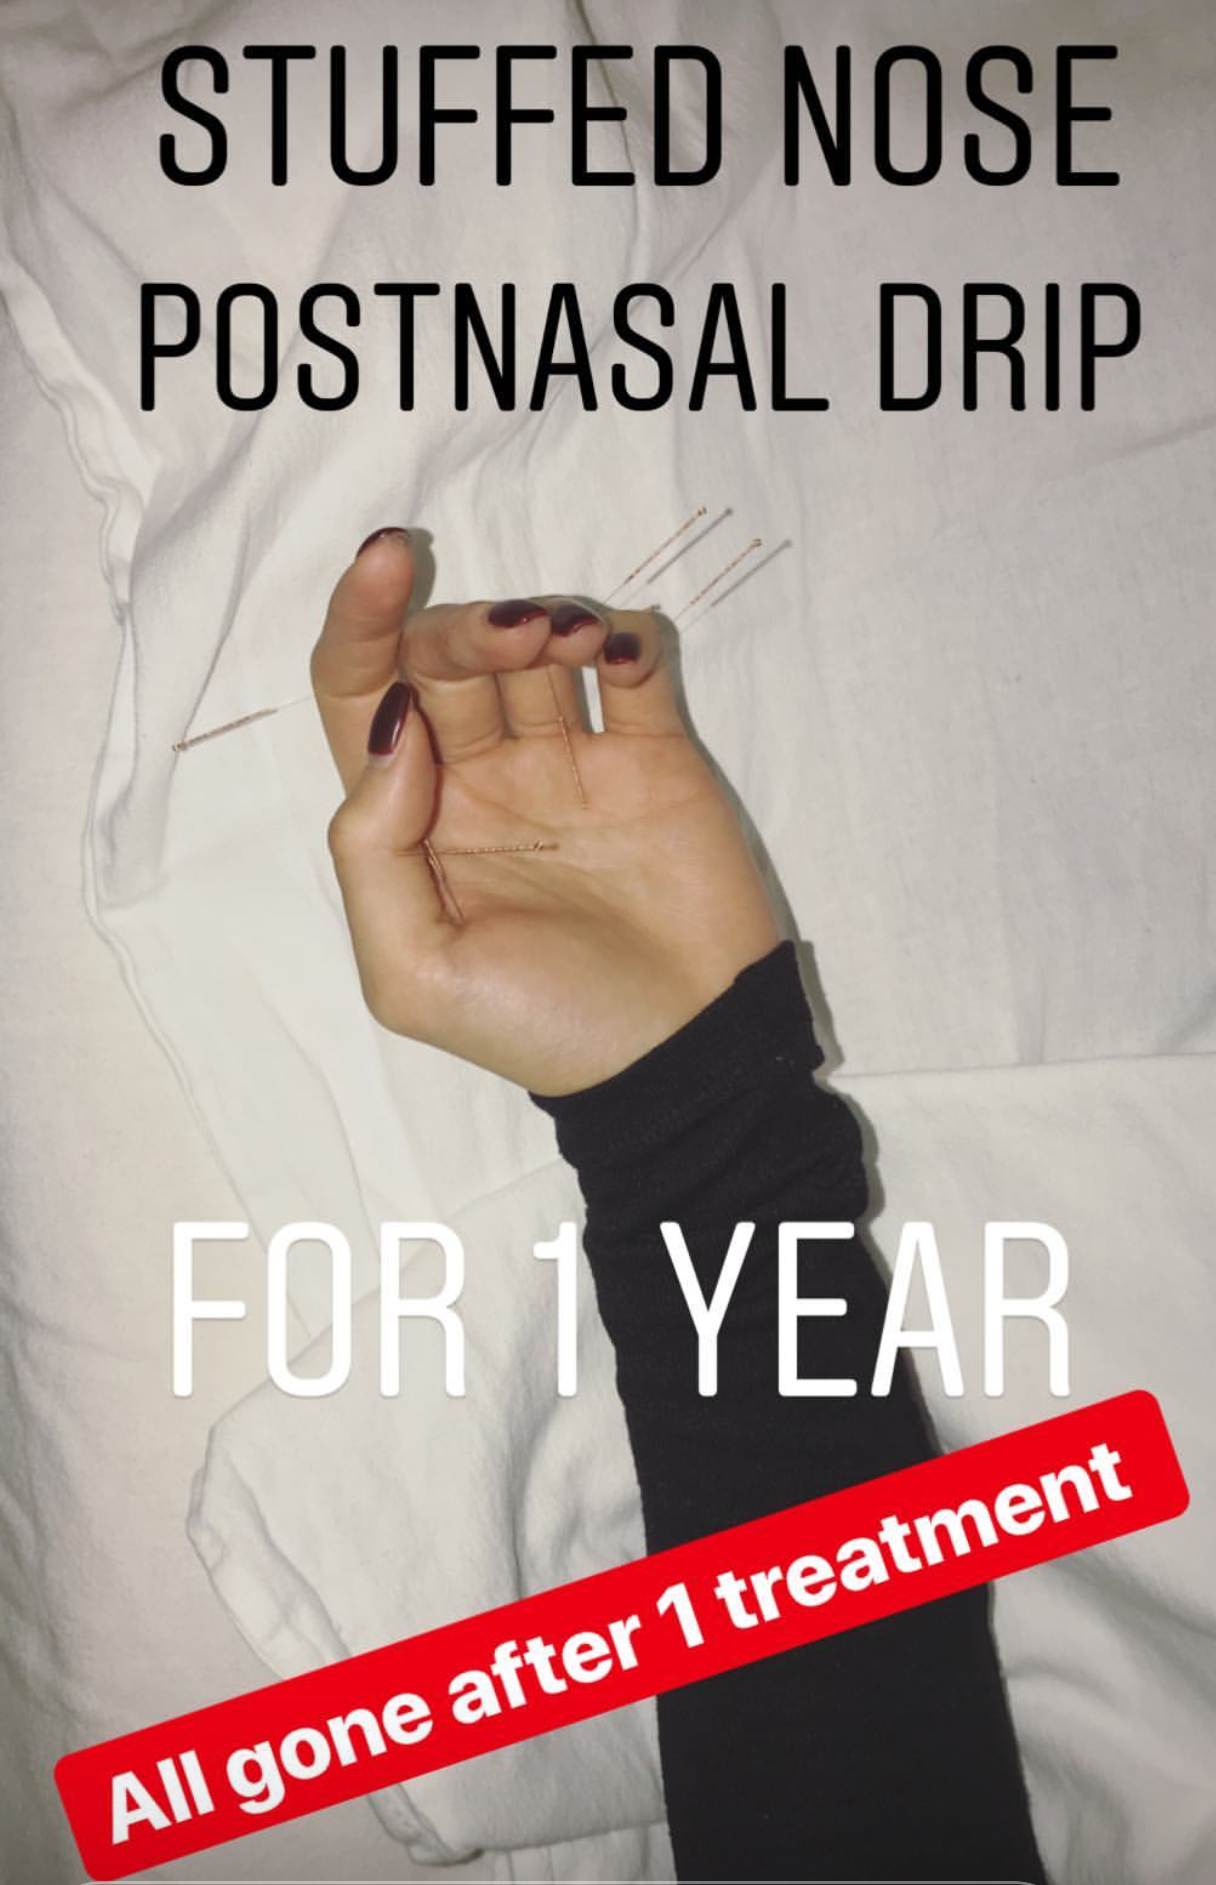  SuJok acupuncture in Vancouver treated for postnasal drip of one year. Treatment results in successful elimination of drip 